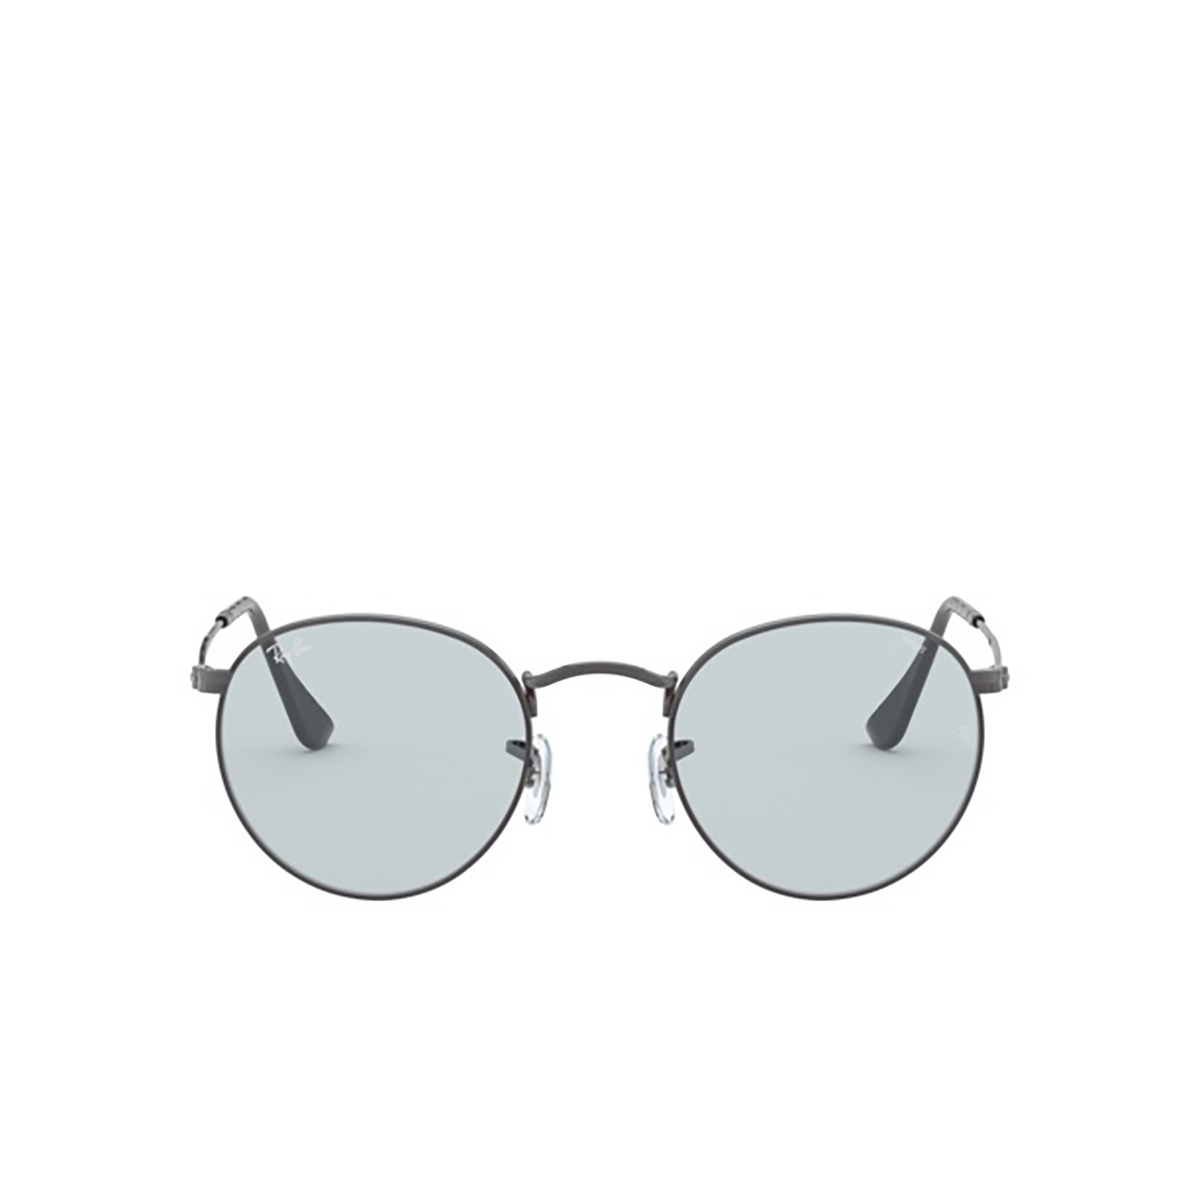 Ray-Ban ROUND METAL Sunglasses 004/T3 GUNMETAL - front view